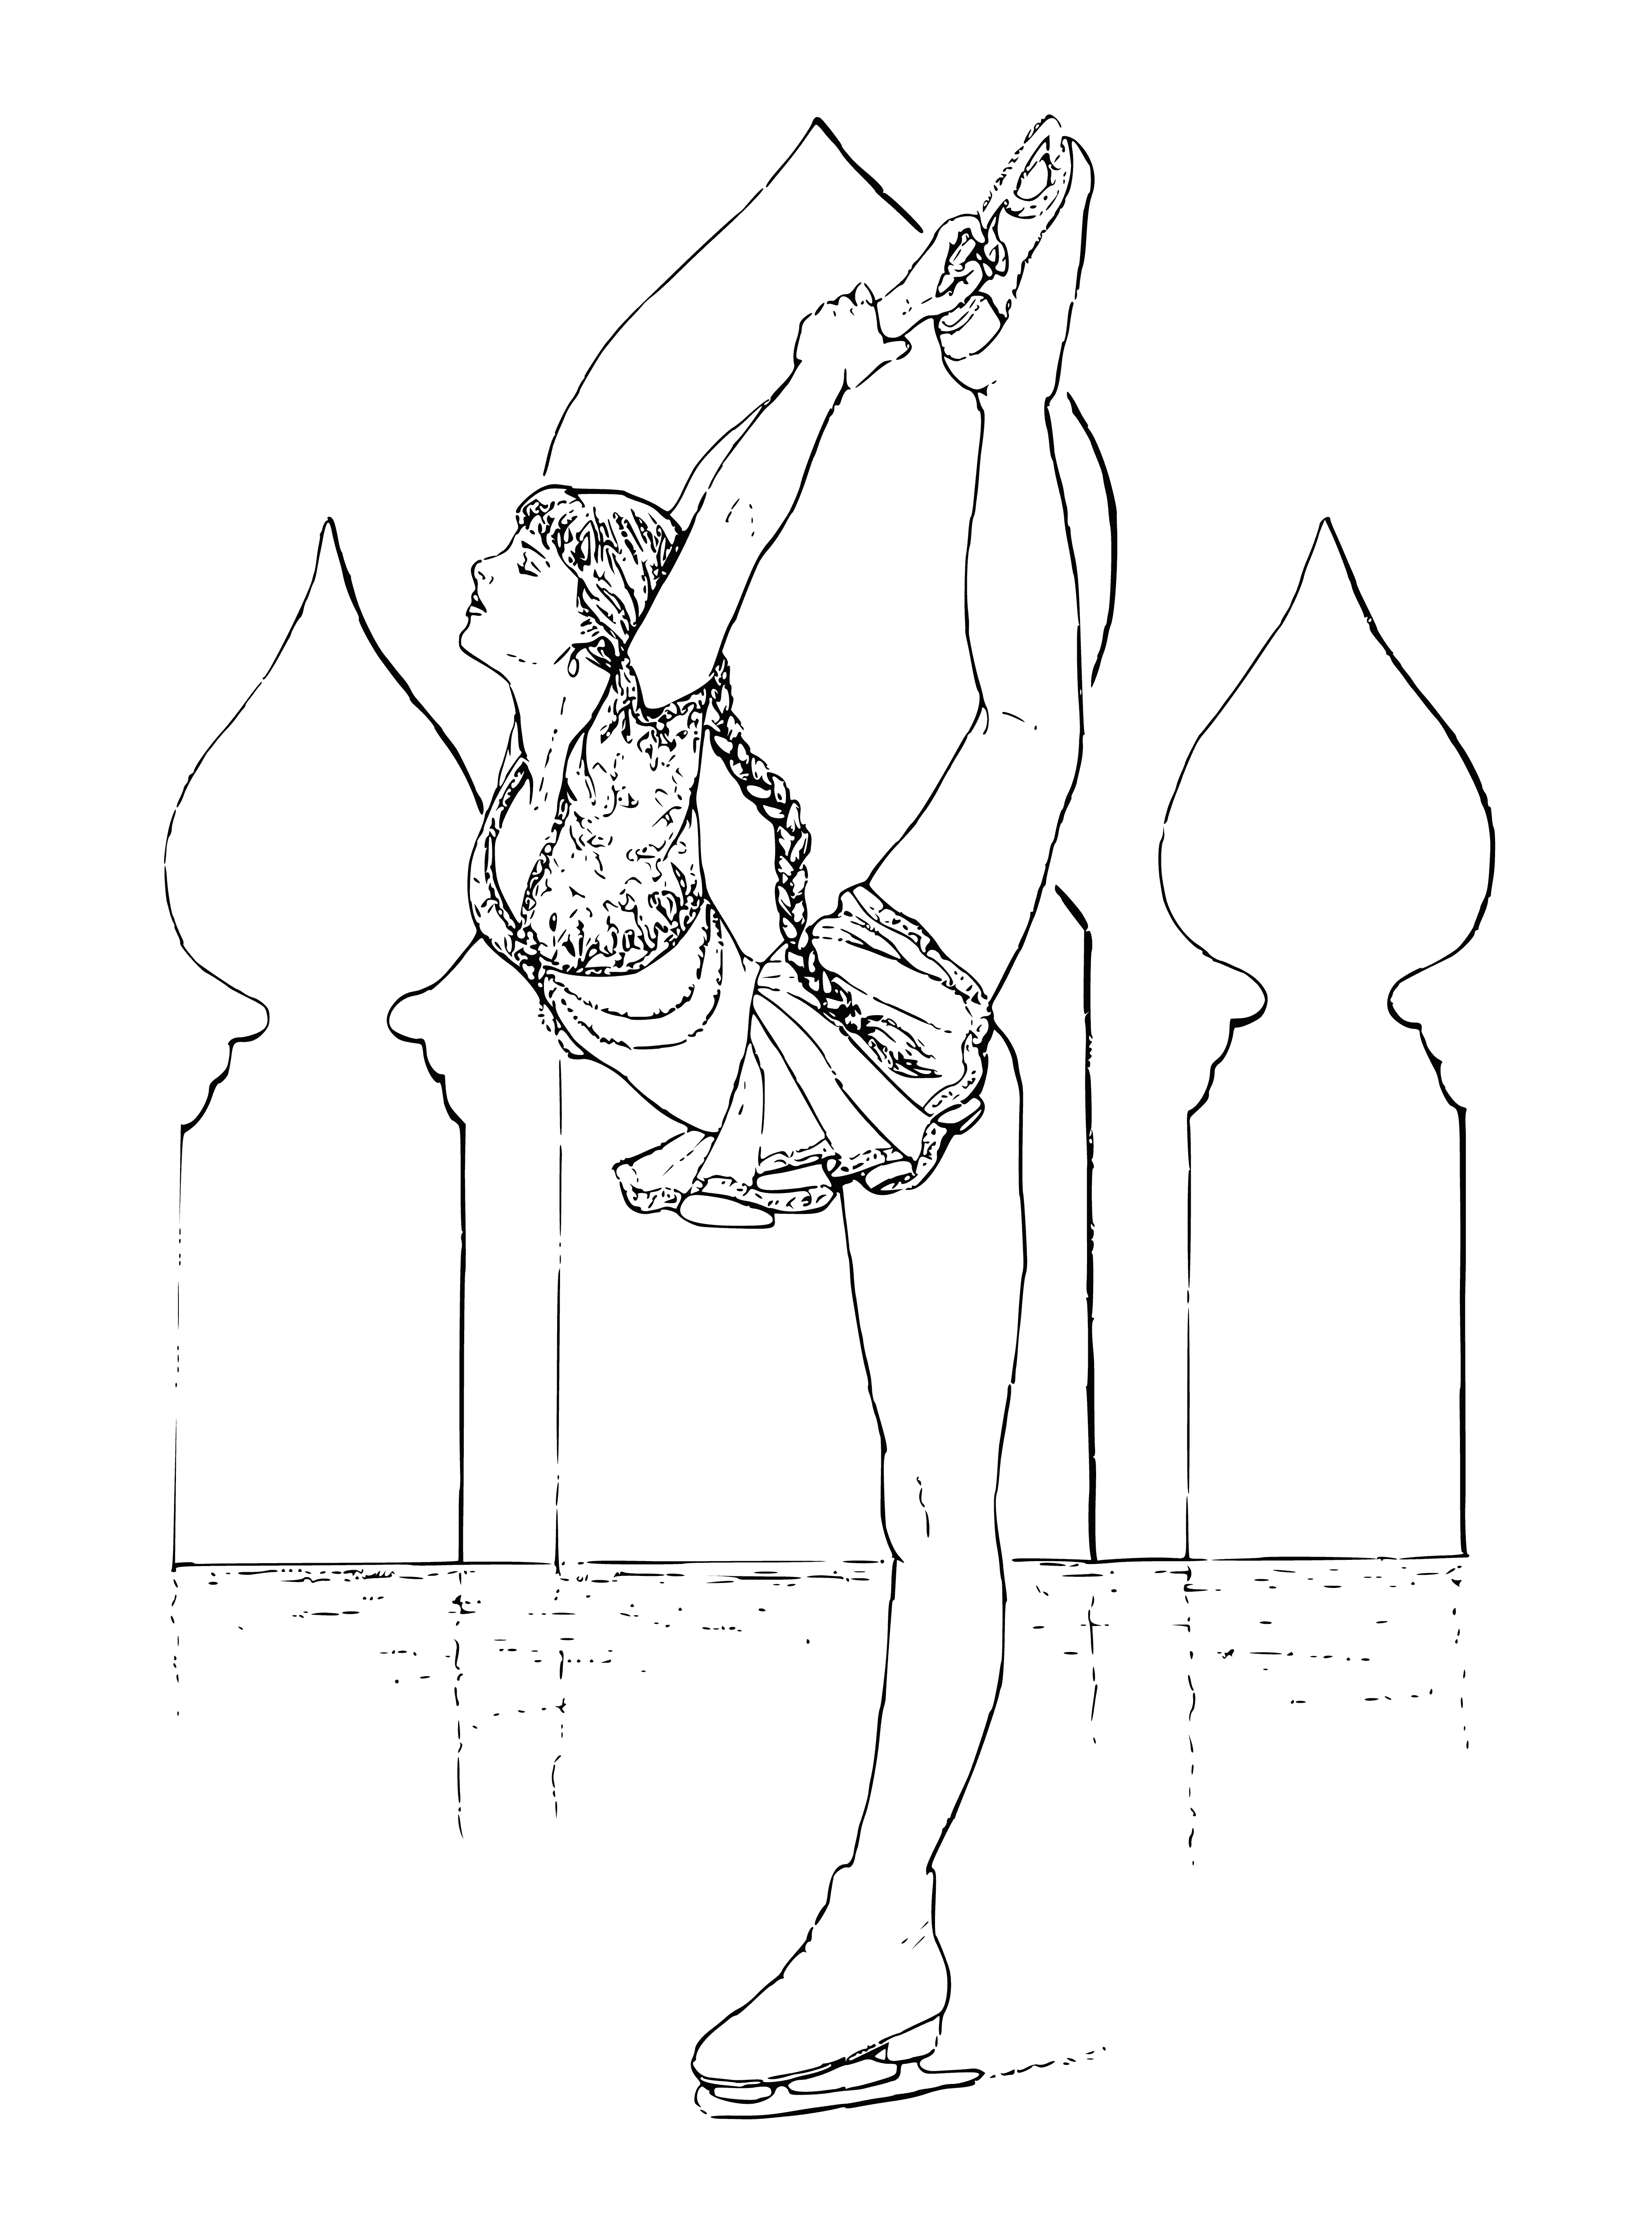 Women's figure skating coloring page